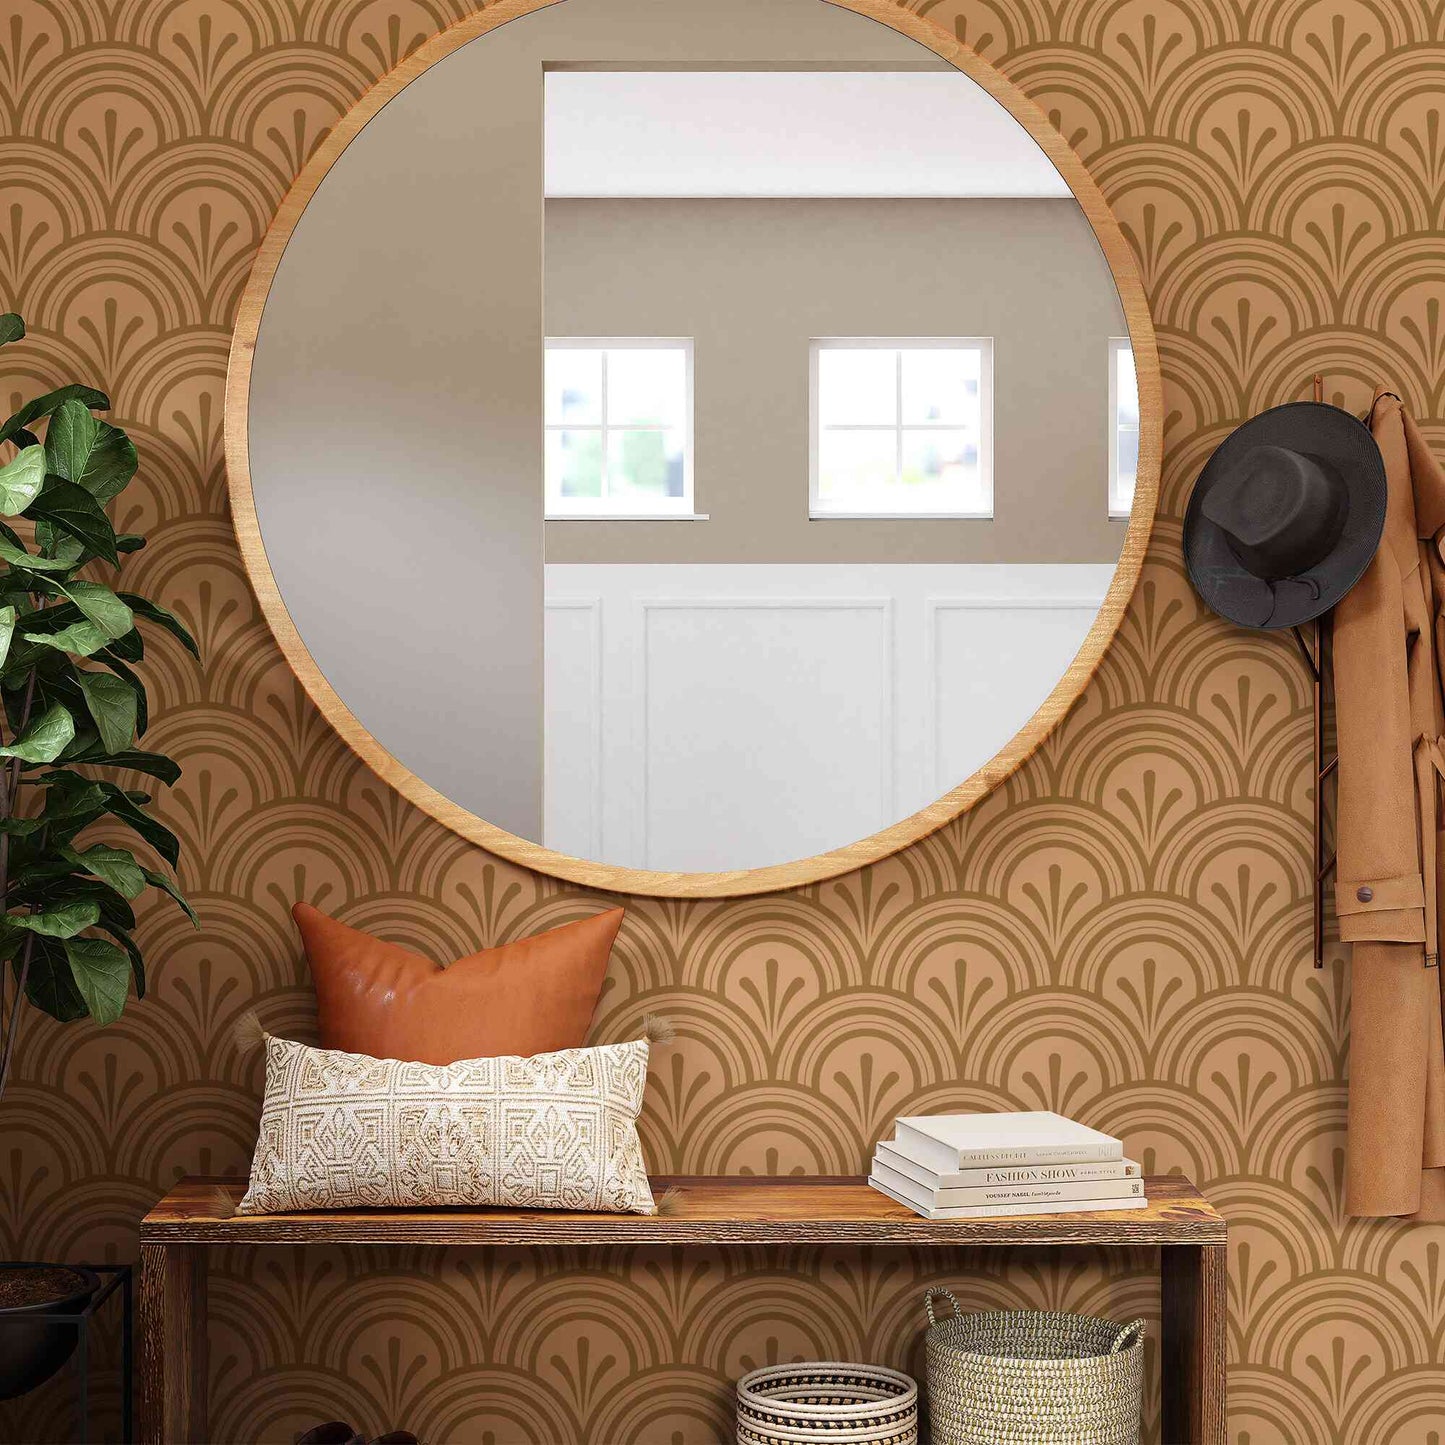 Luxury pattern murals wallpaper adding an opulent touch to your space.